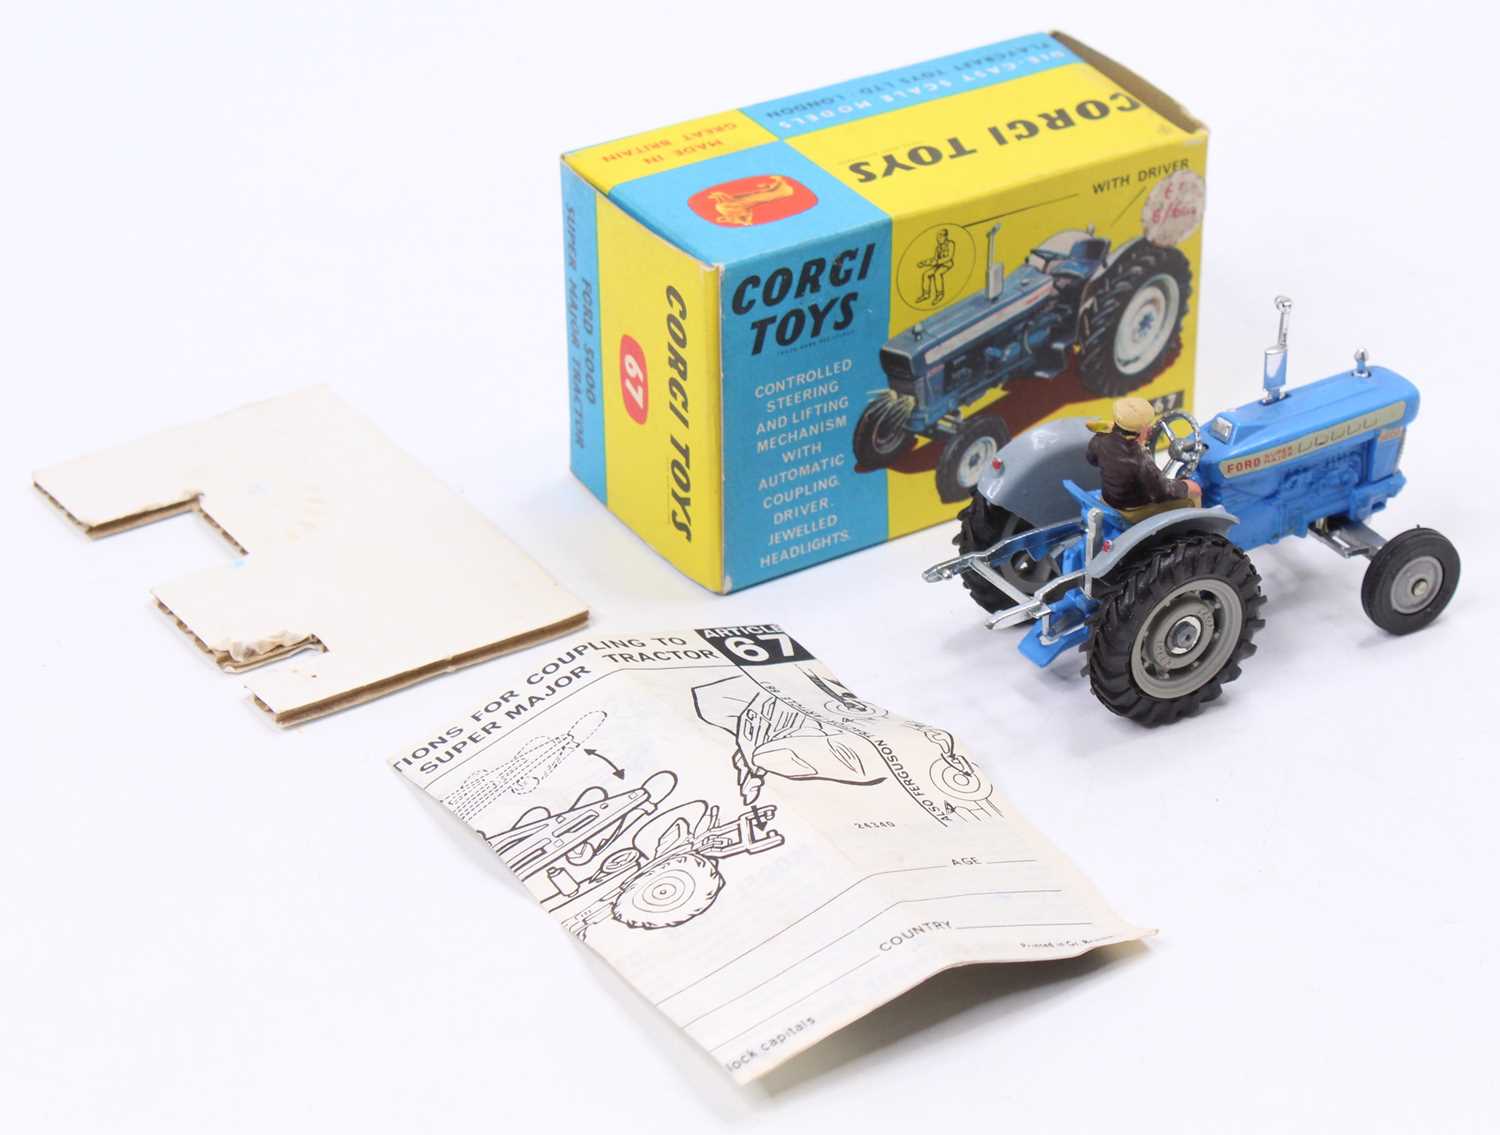 Corgi Toys No. 67 Ford 5000 Super Major Tractor finished in blue with grey hubs and driver figure, - Bild 2 aus 2